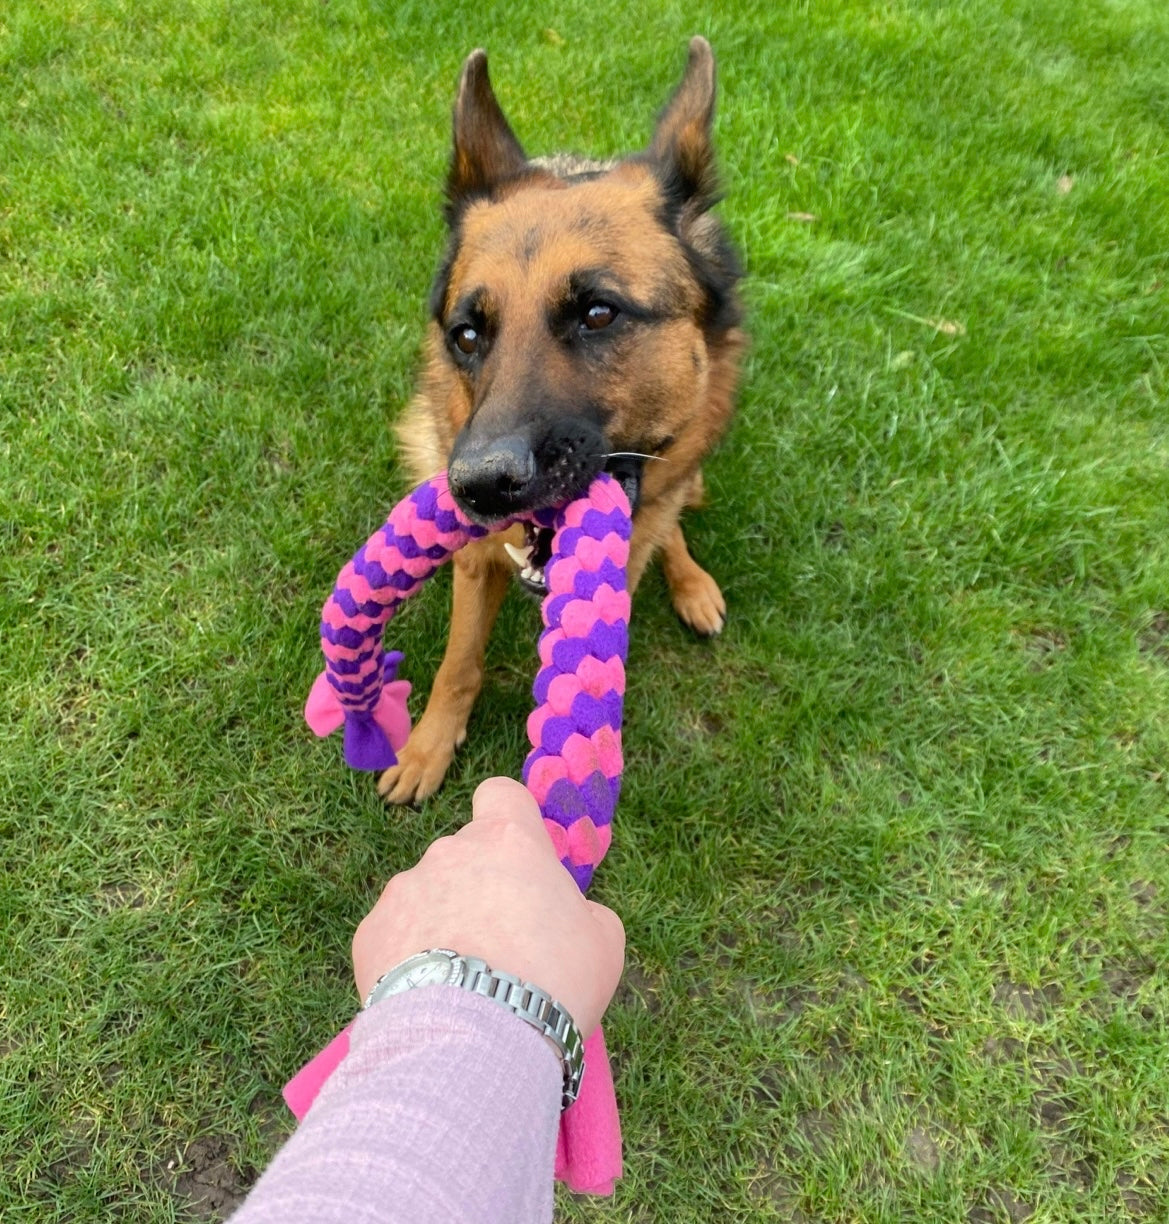 Jumbo - big breed hand made tug toy create your own dog toy